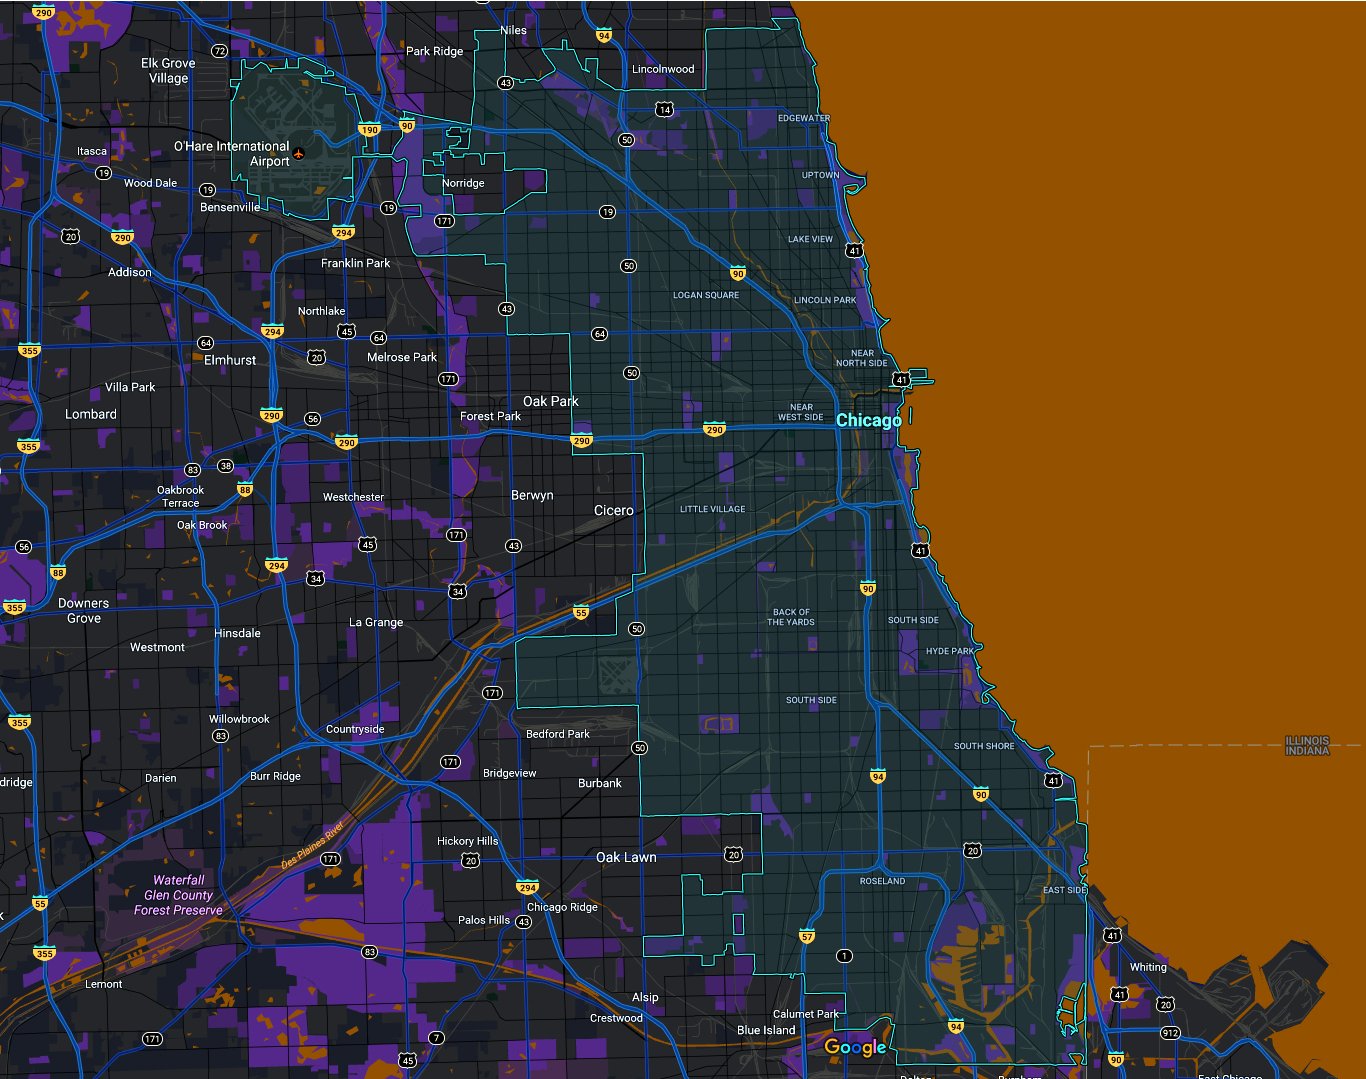 Chicagoland the map.jpg